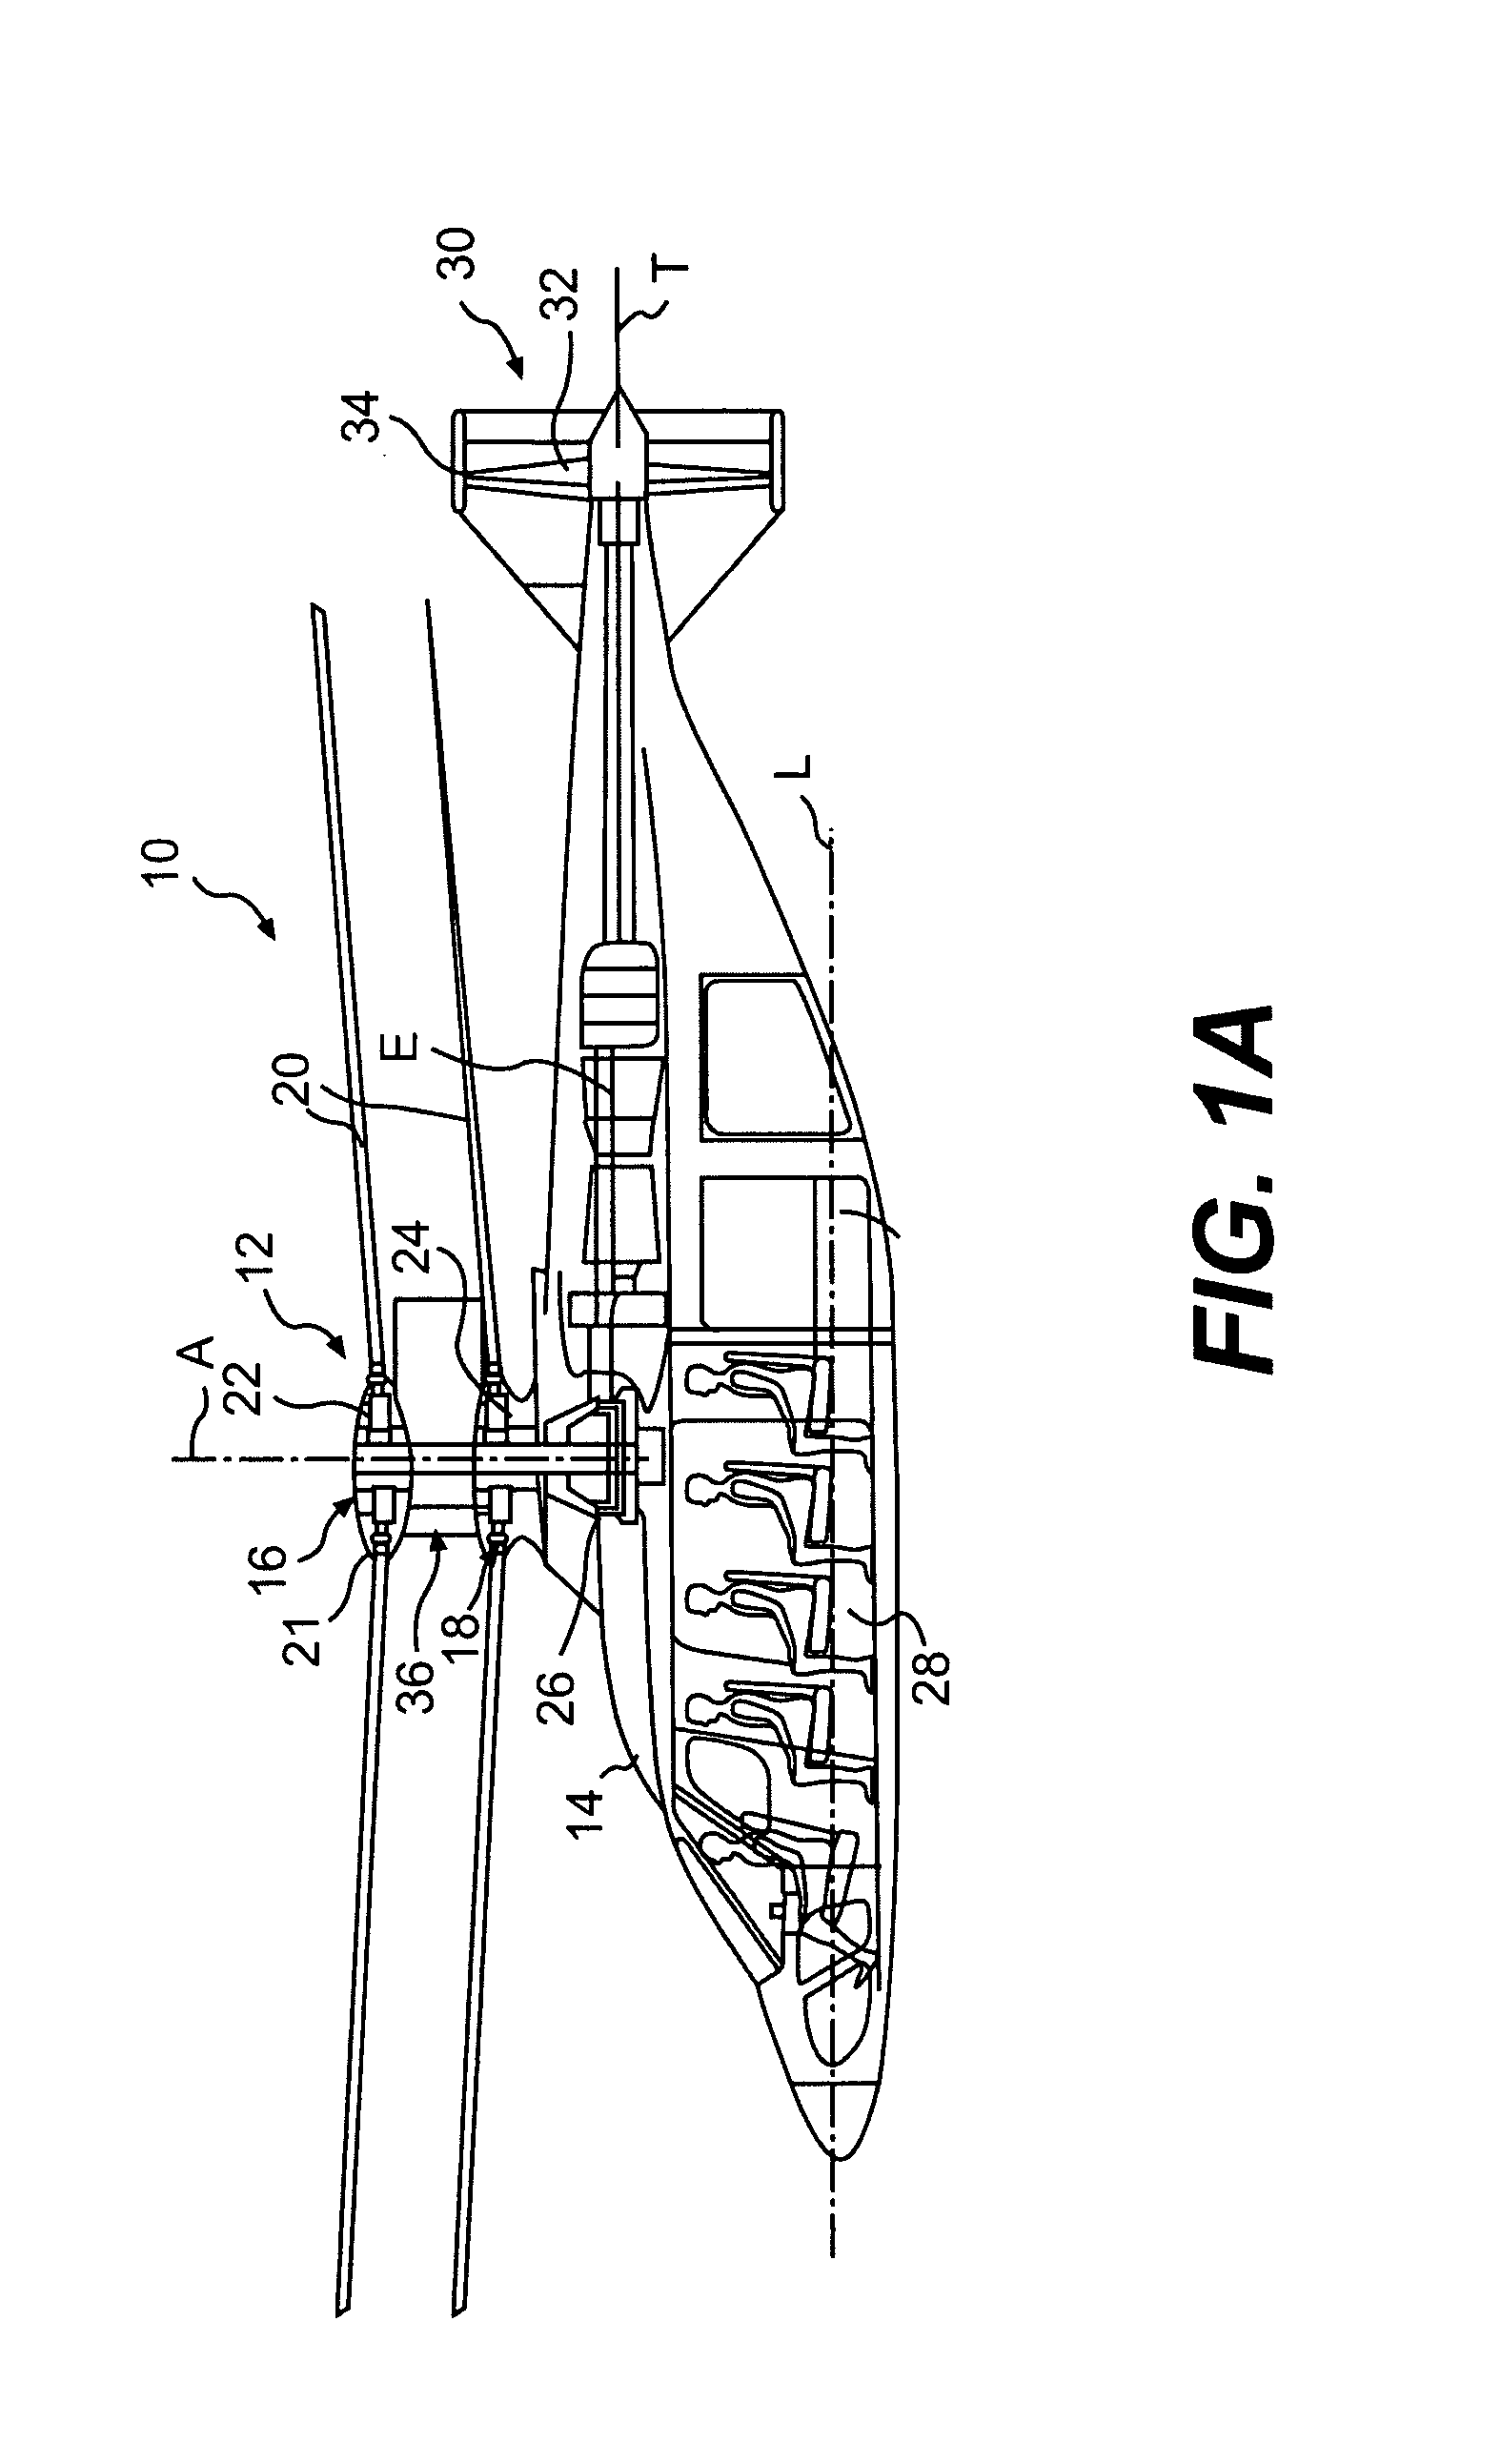 Rotor hub fairing system for a counter-rotating, coaxial rotor system